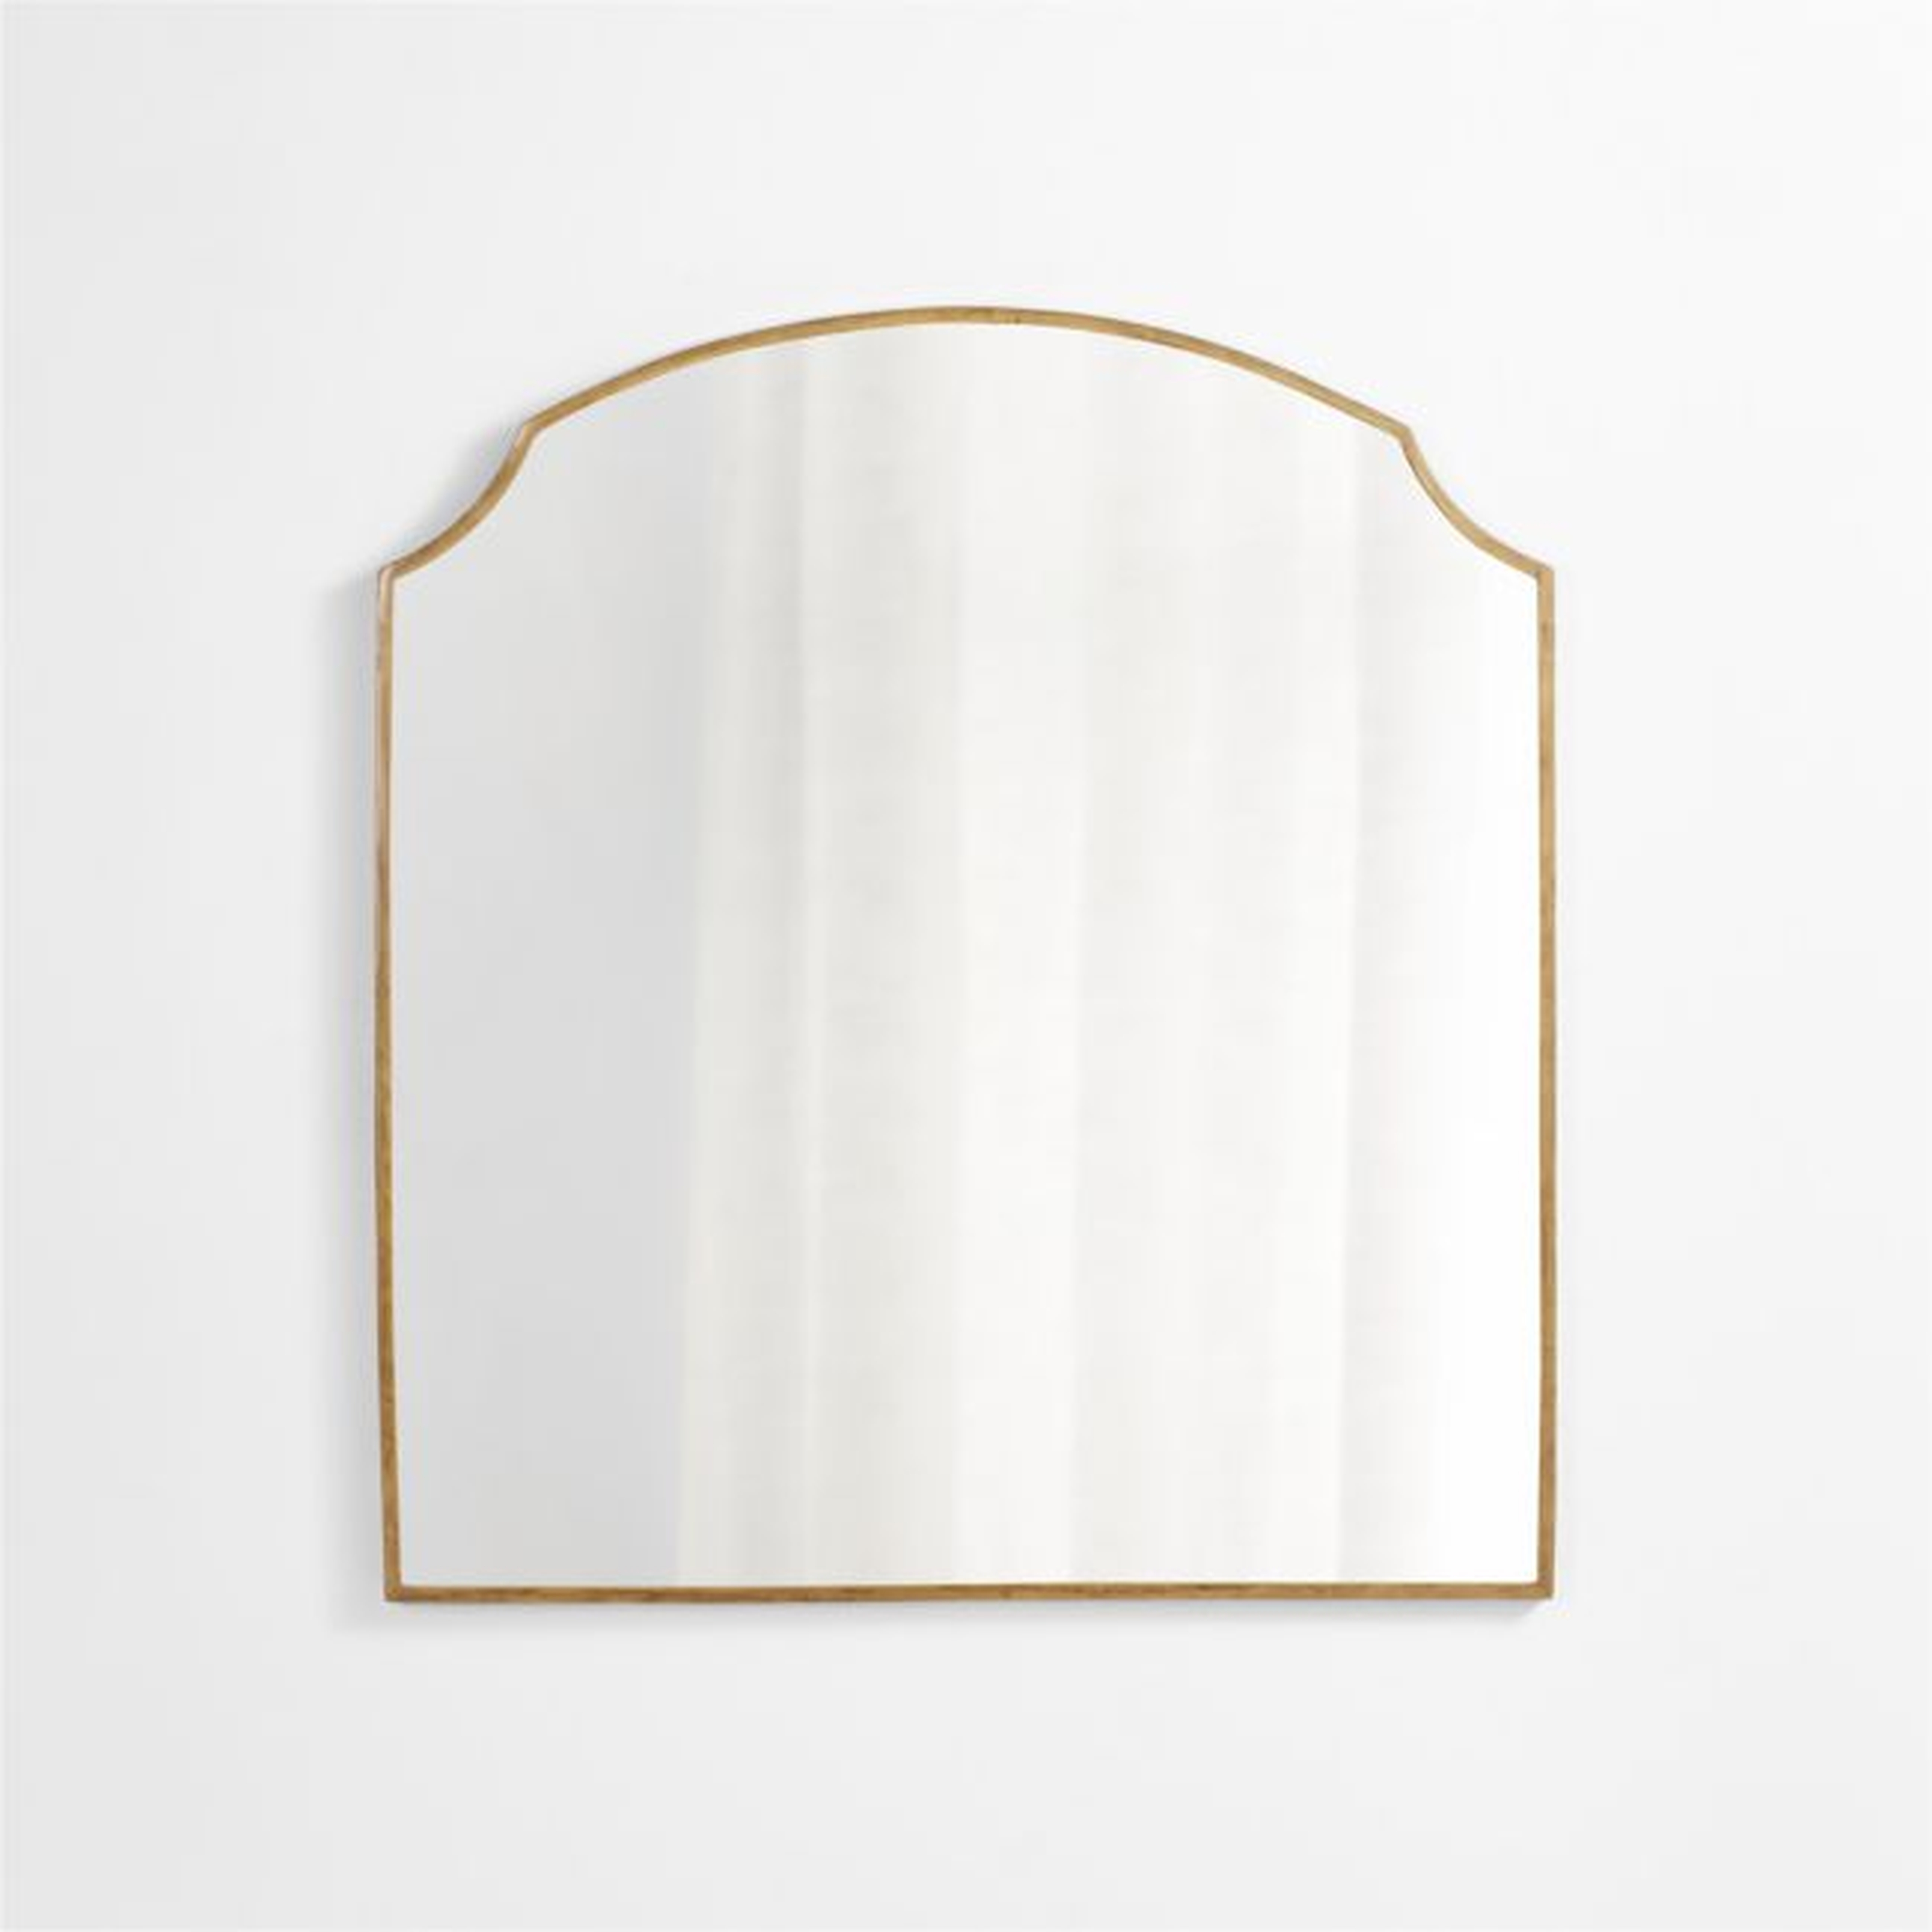 Emmy Brass Wall Mirror - Crate and Barrel